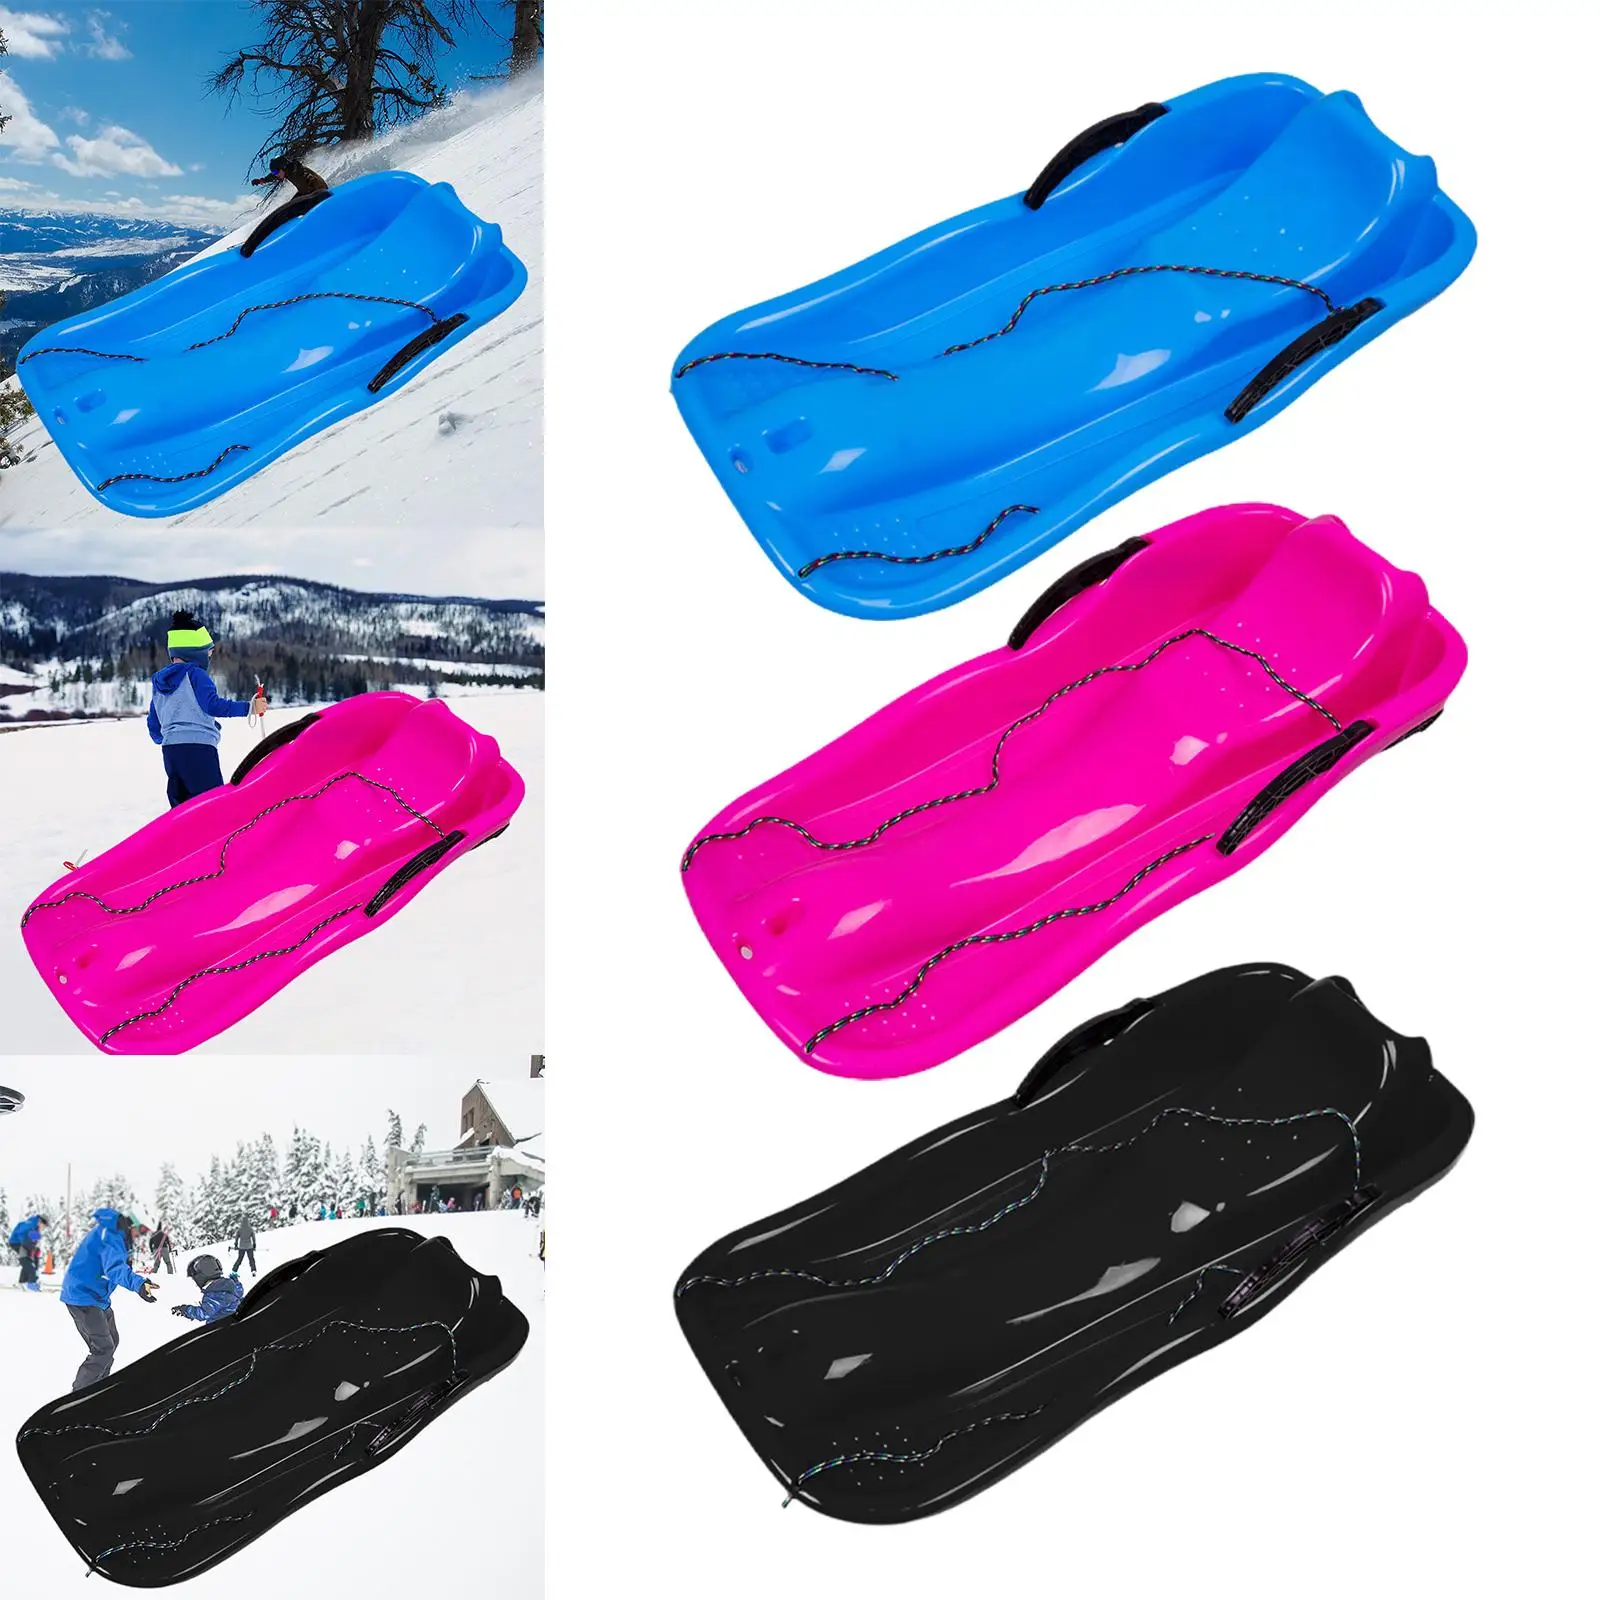 Portable sled, double human sled, , downhill sled with , winter snow sled for